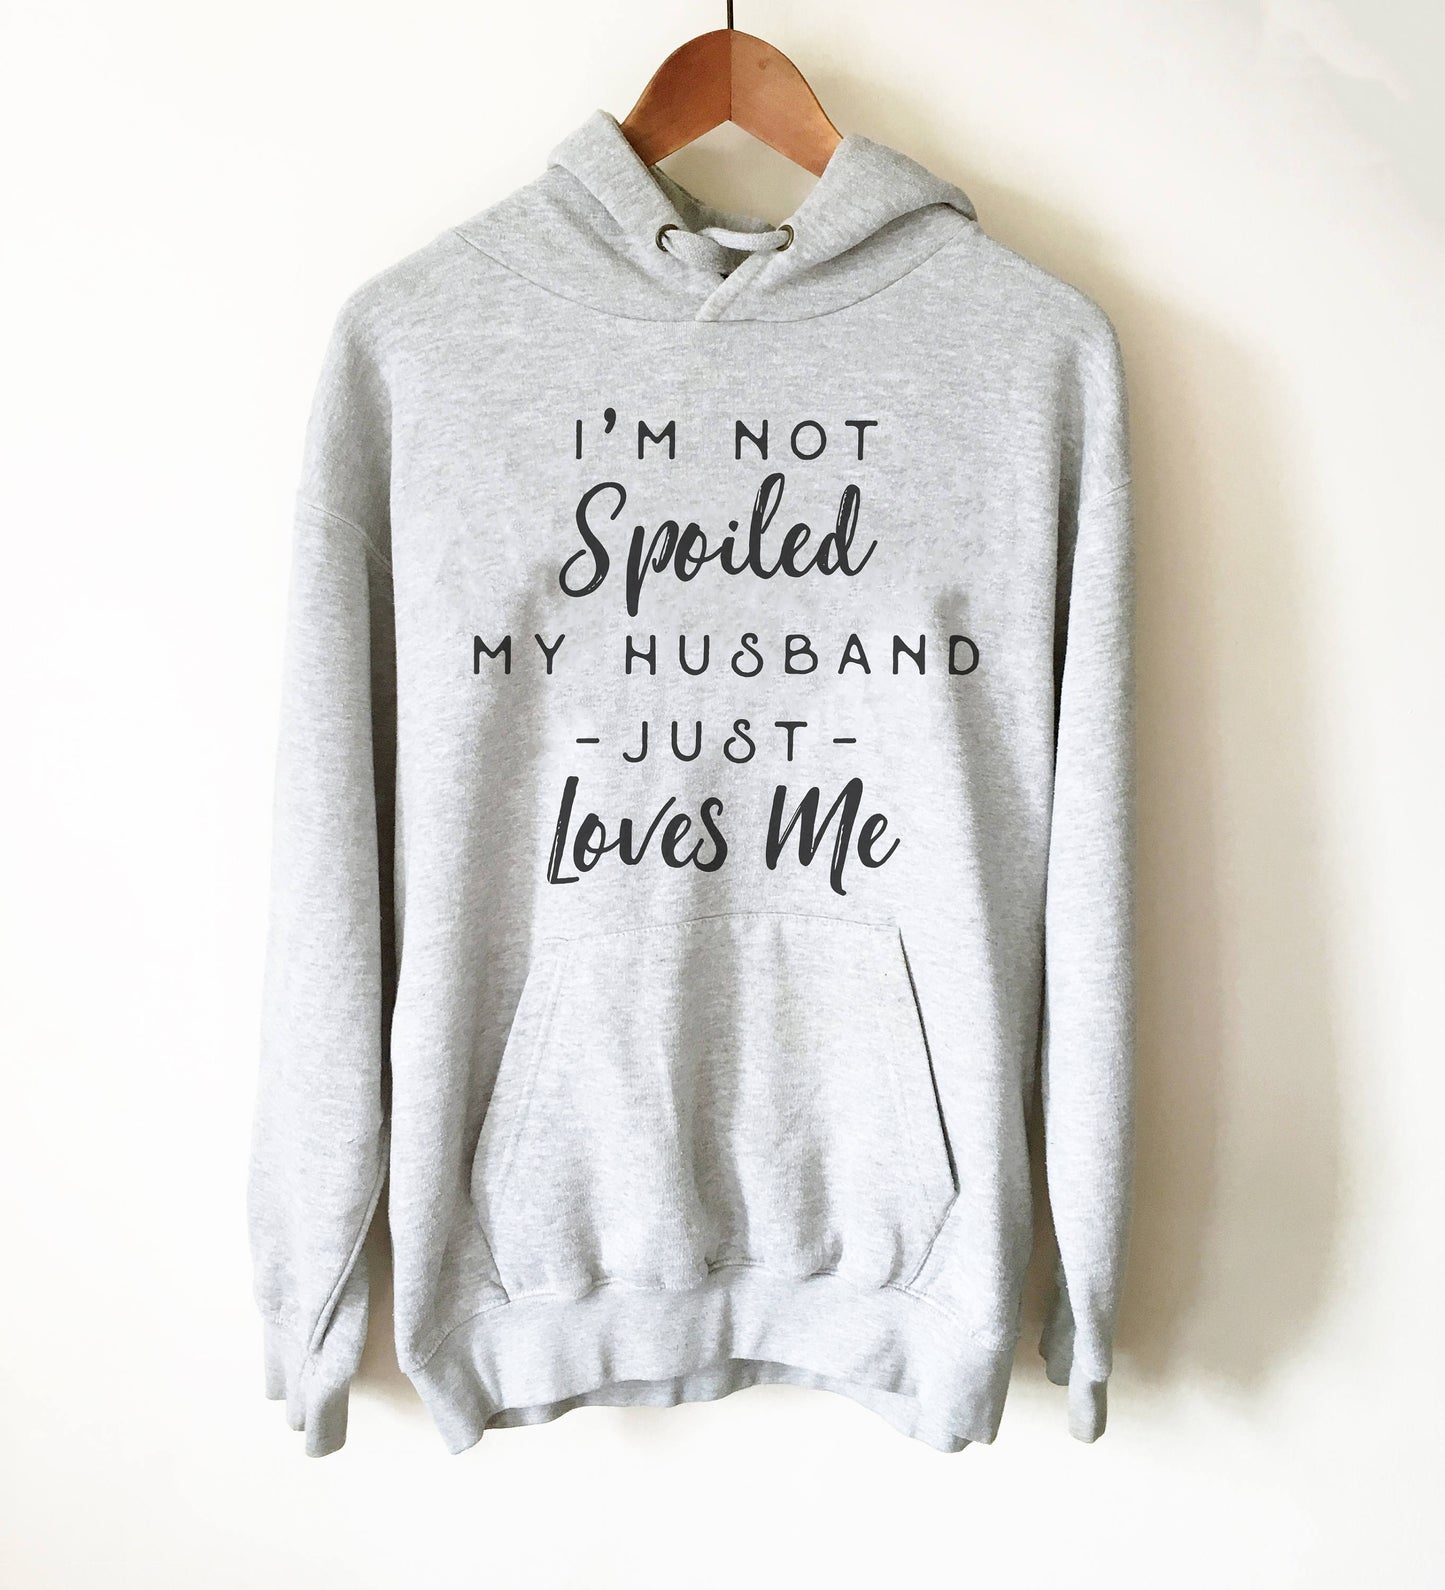 I'm Not Spoiled My Husband Just Loves Me Hoodie-Honeymoon Shirt, Just Married Shirts, Wifey Shirt, Wifey Shirts, Mrs Shirt, Wifey Sweatshirt